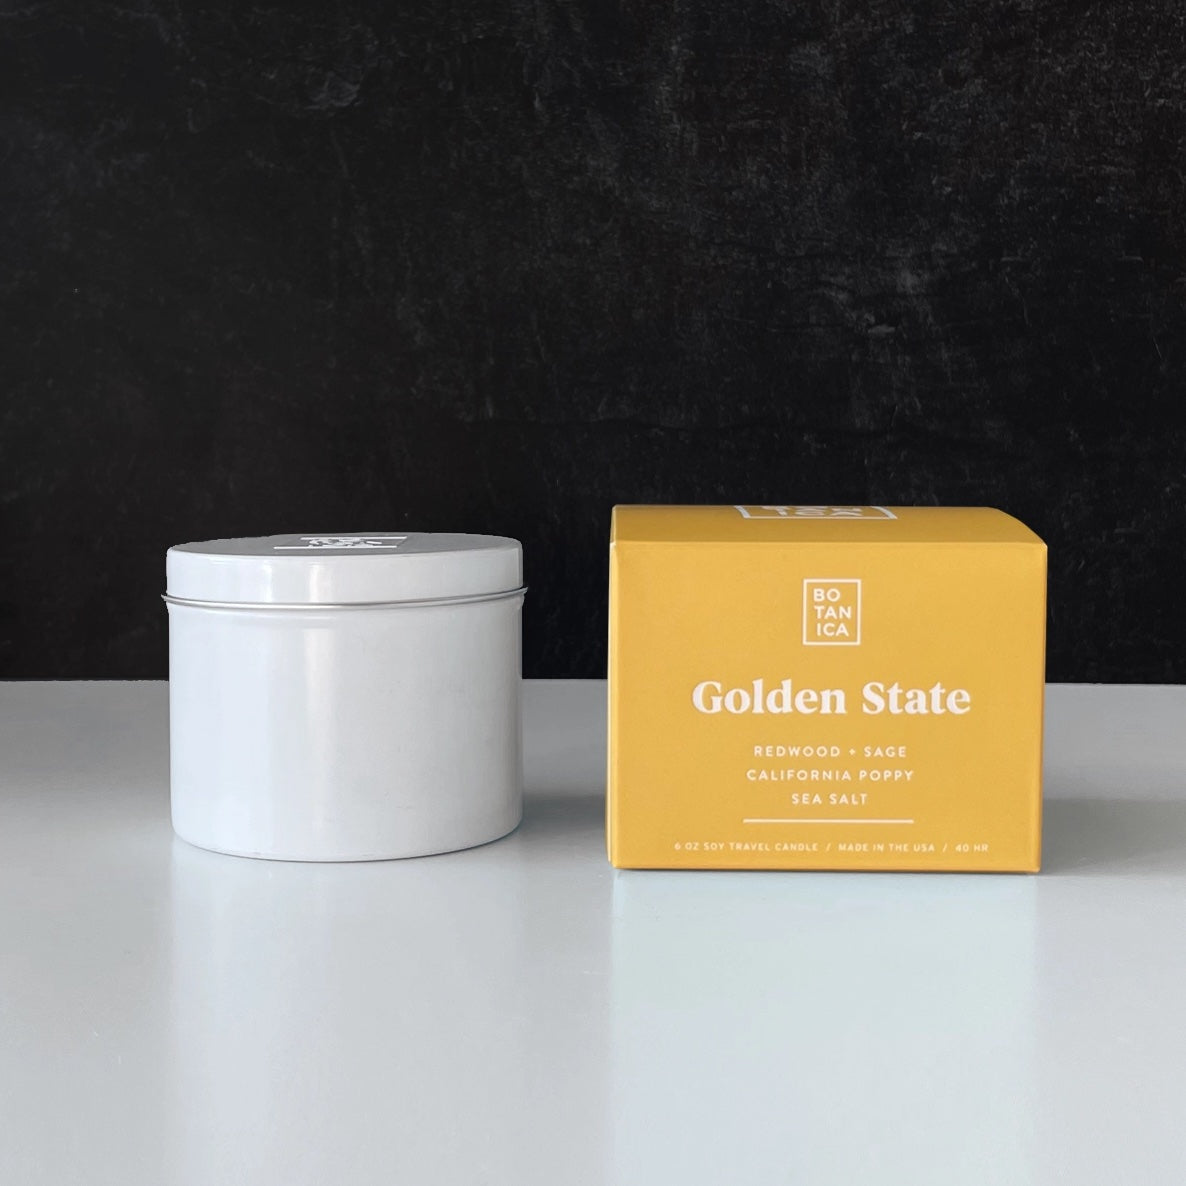 Golden State Redwood, Sage, Sea Salt & Poppy Soy Wax Candle